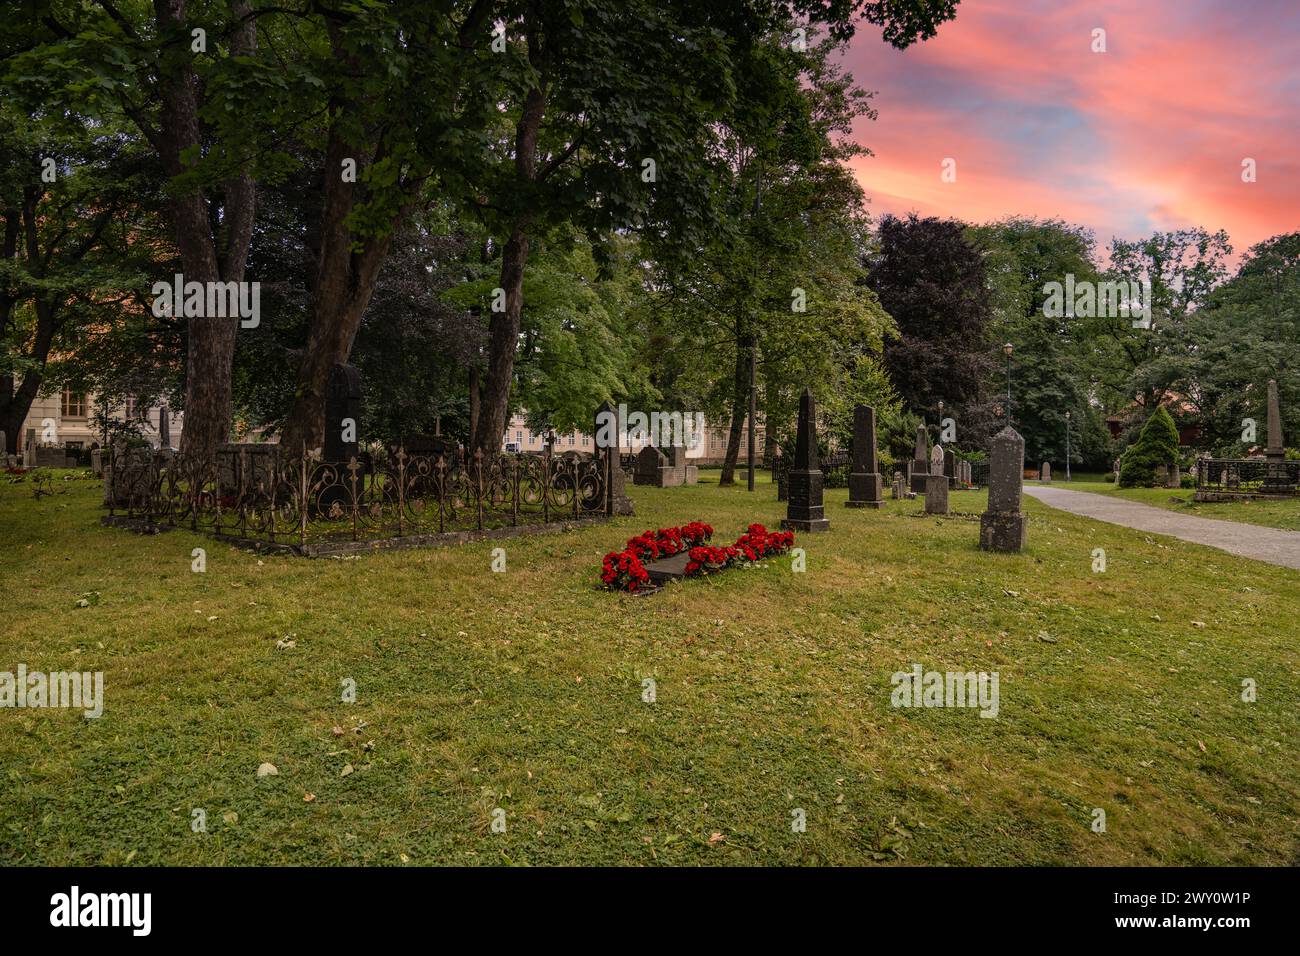 Dusk at Nidaros Cathedral Graveyard in Trondheim Norway. Serene evening at the burial ground with sunset sky casting warm hues over the historic site Stock Photo